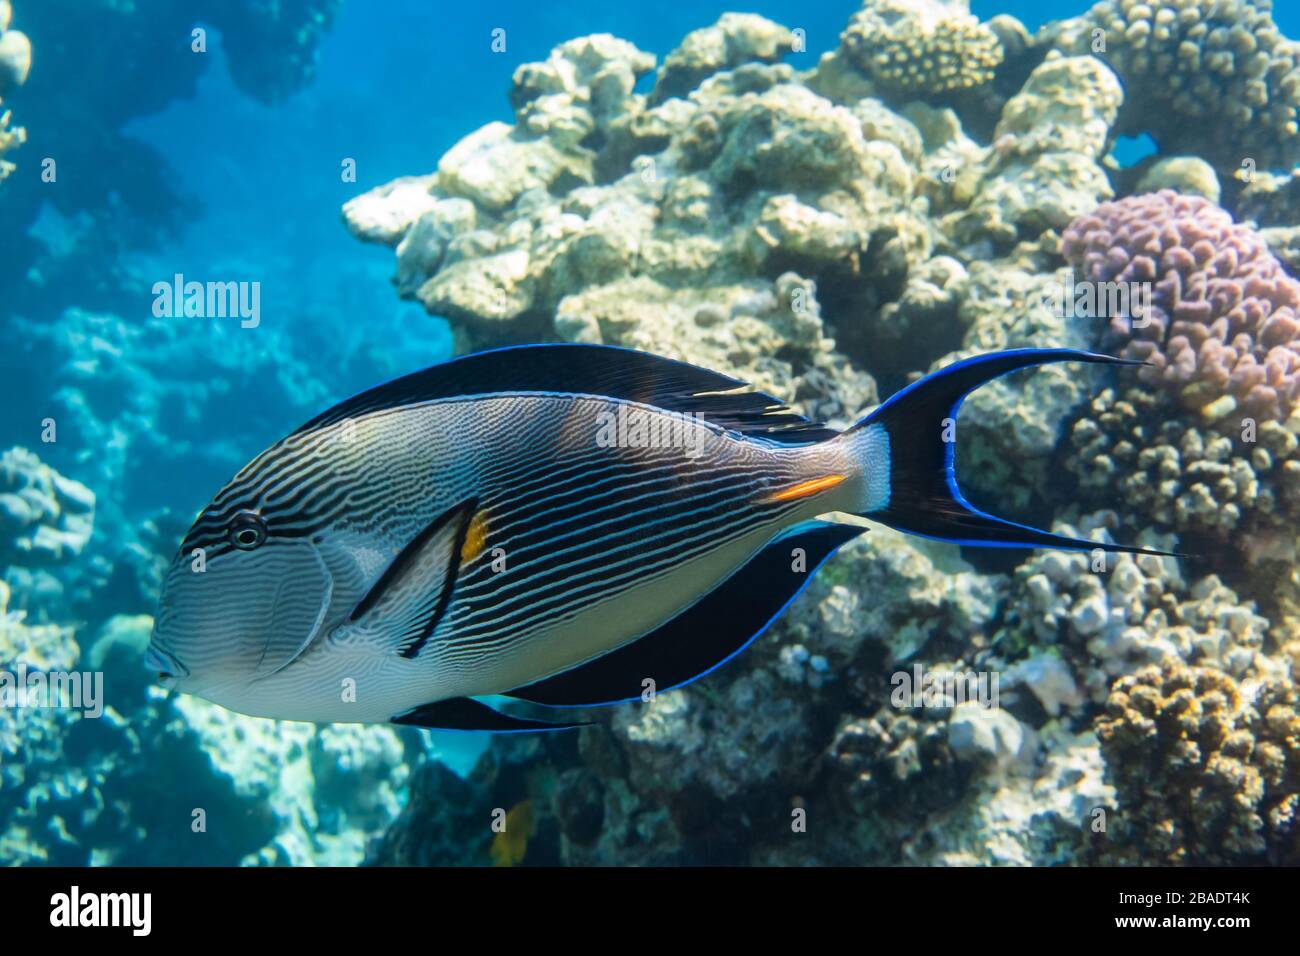 Tropical Fish In The Ocean Near Coral Reef. Sohal Surgeonfish (Acanthurus Sohal) With Black Fins, Yellow And Blue Stripes In The Red Sea, Egypt. Side Stock Photo